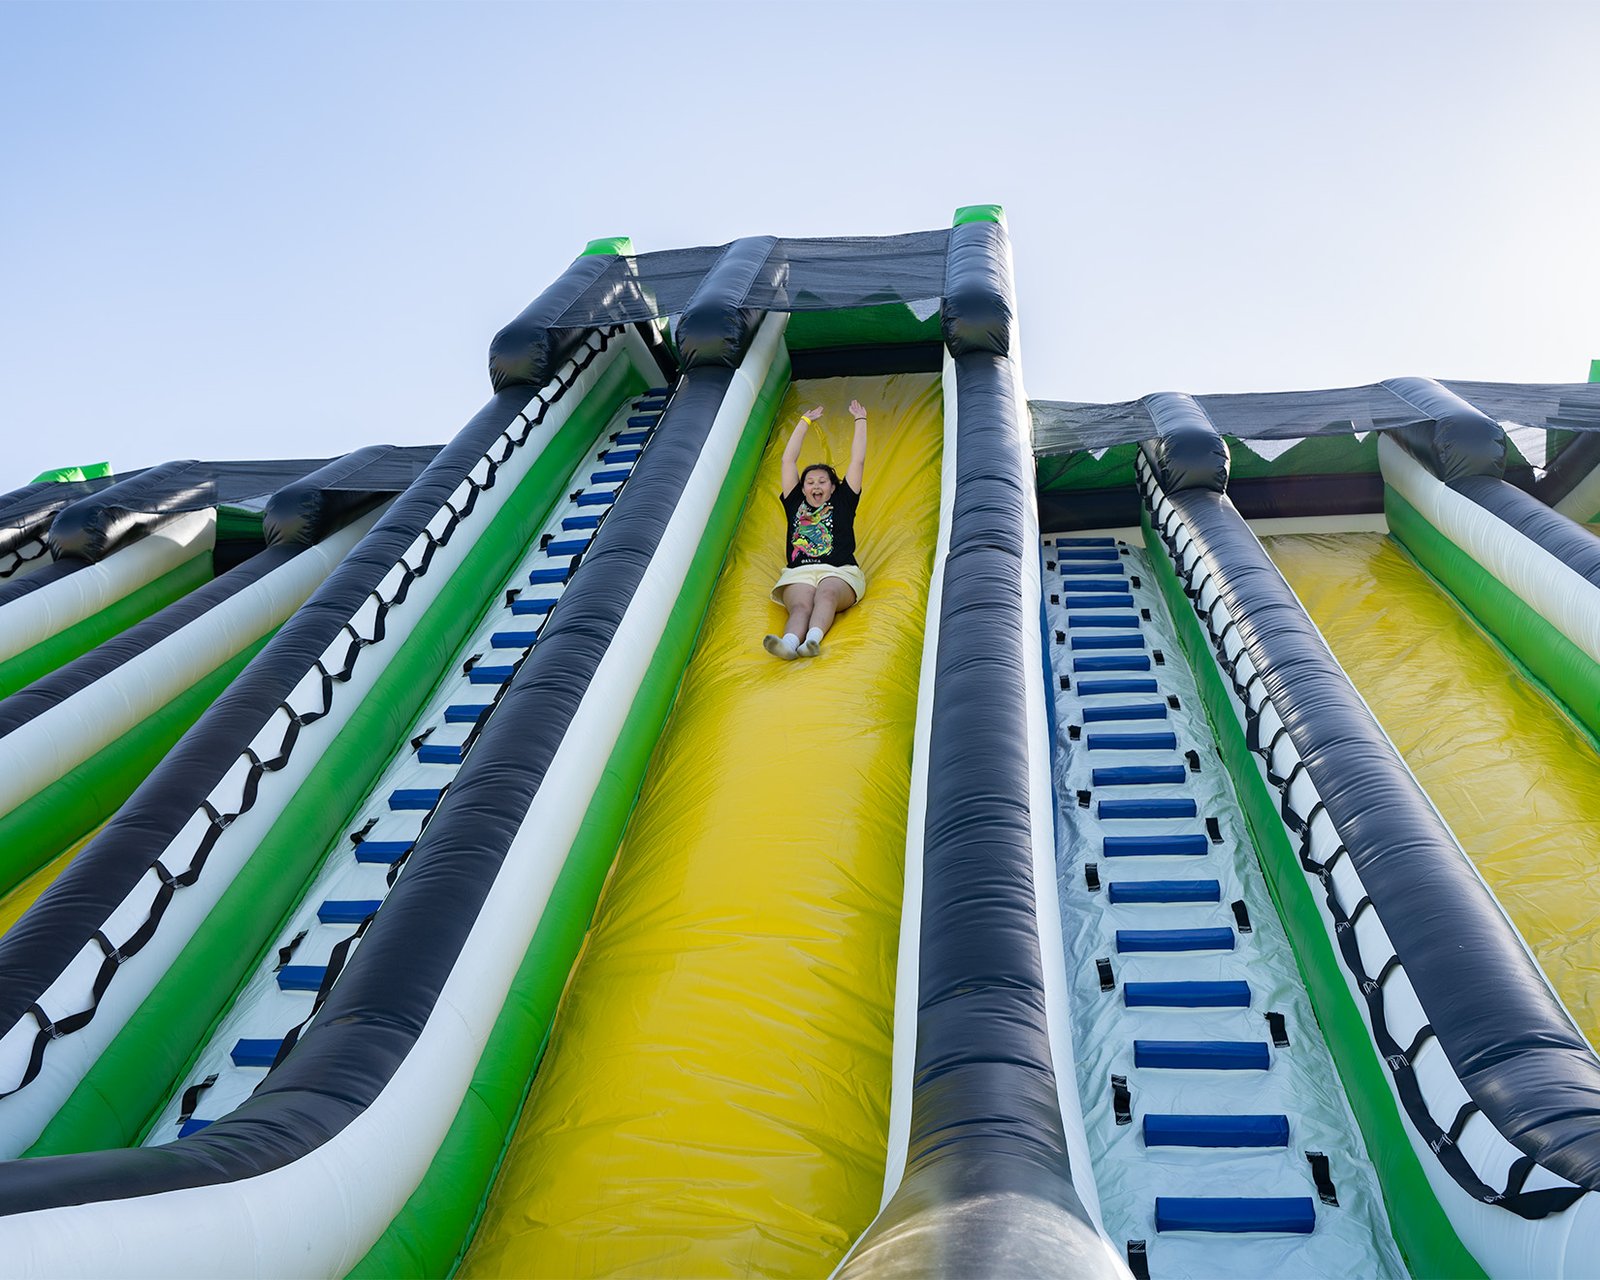 Girl sliding down a giant inflatable slide at one of the world's largest bounce houses